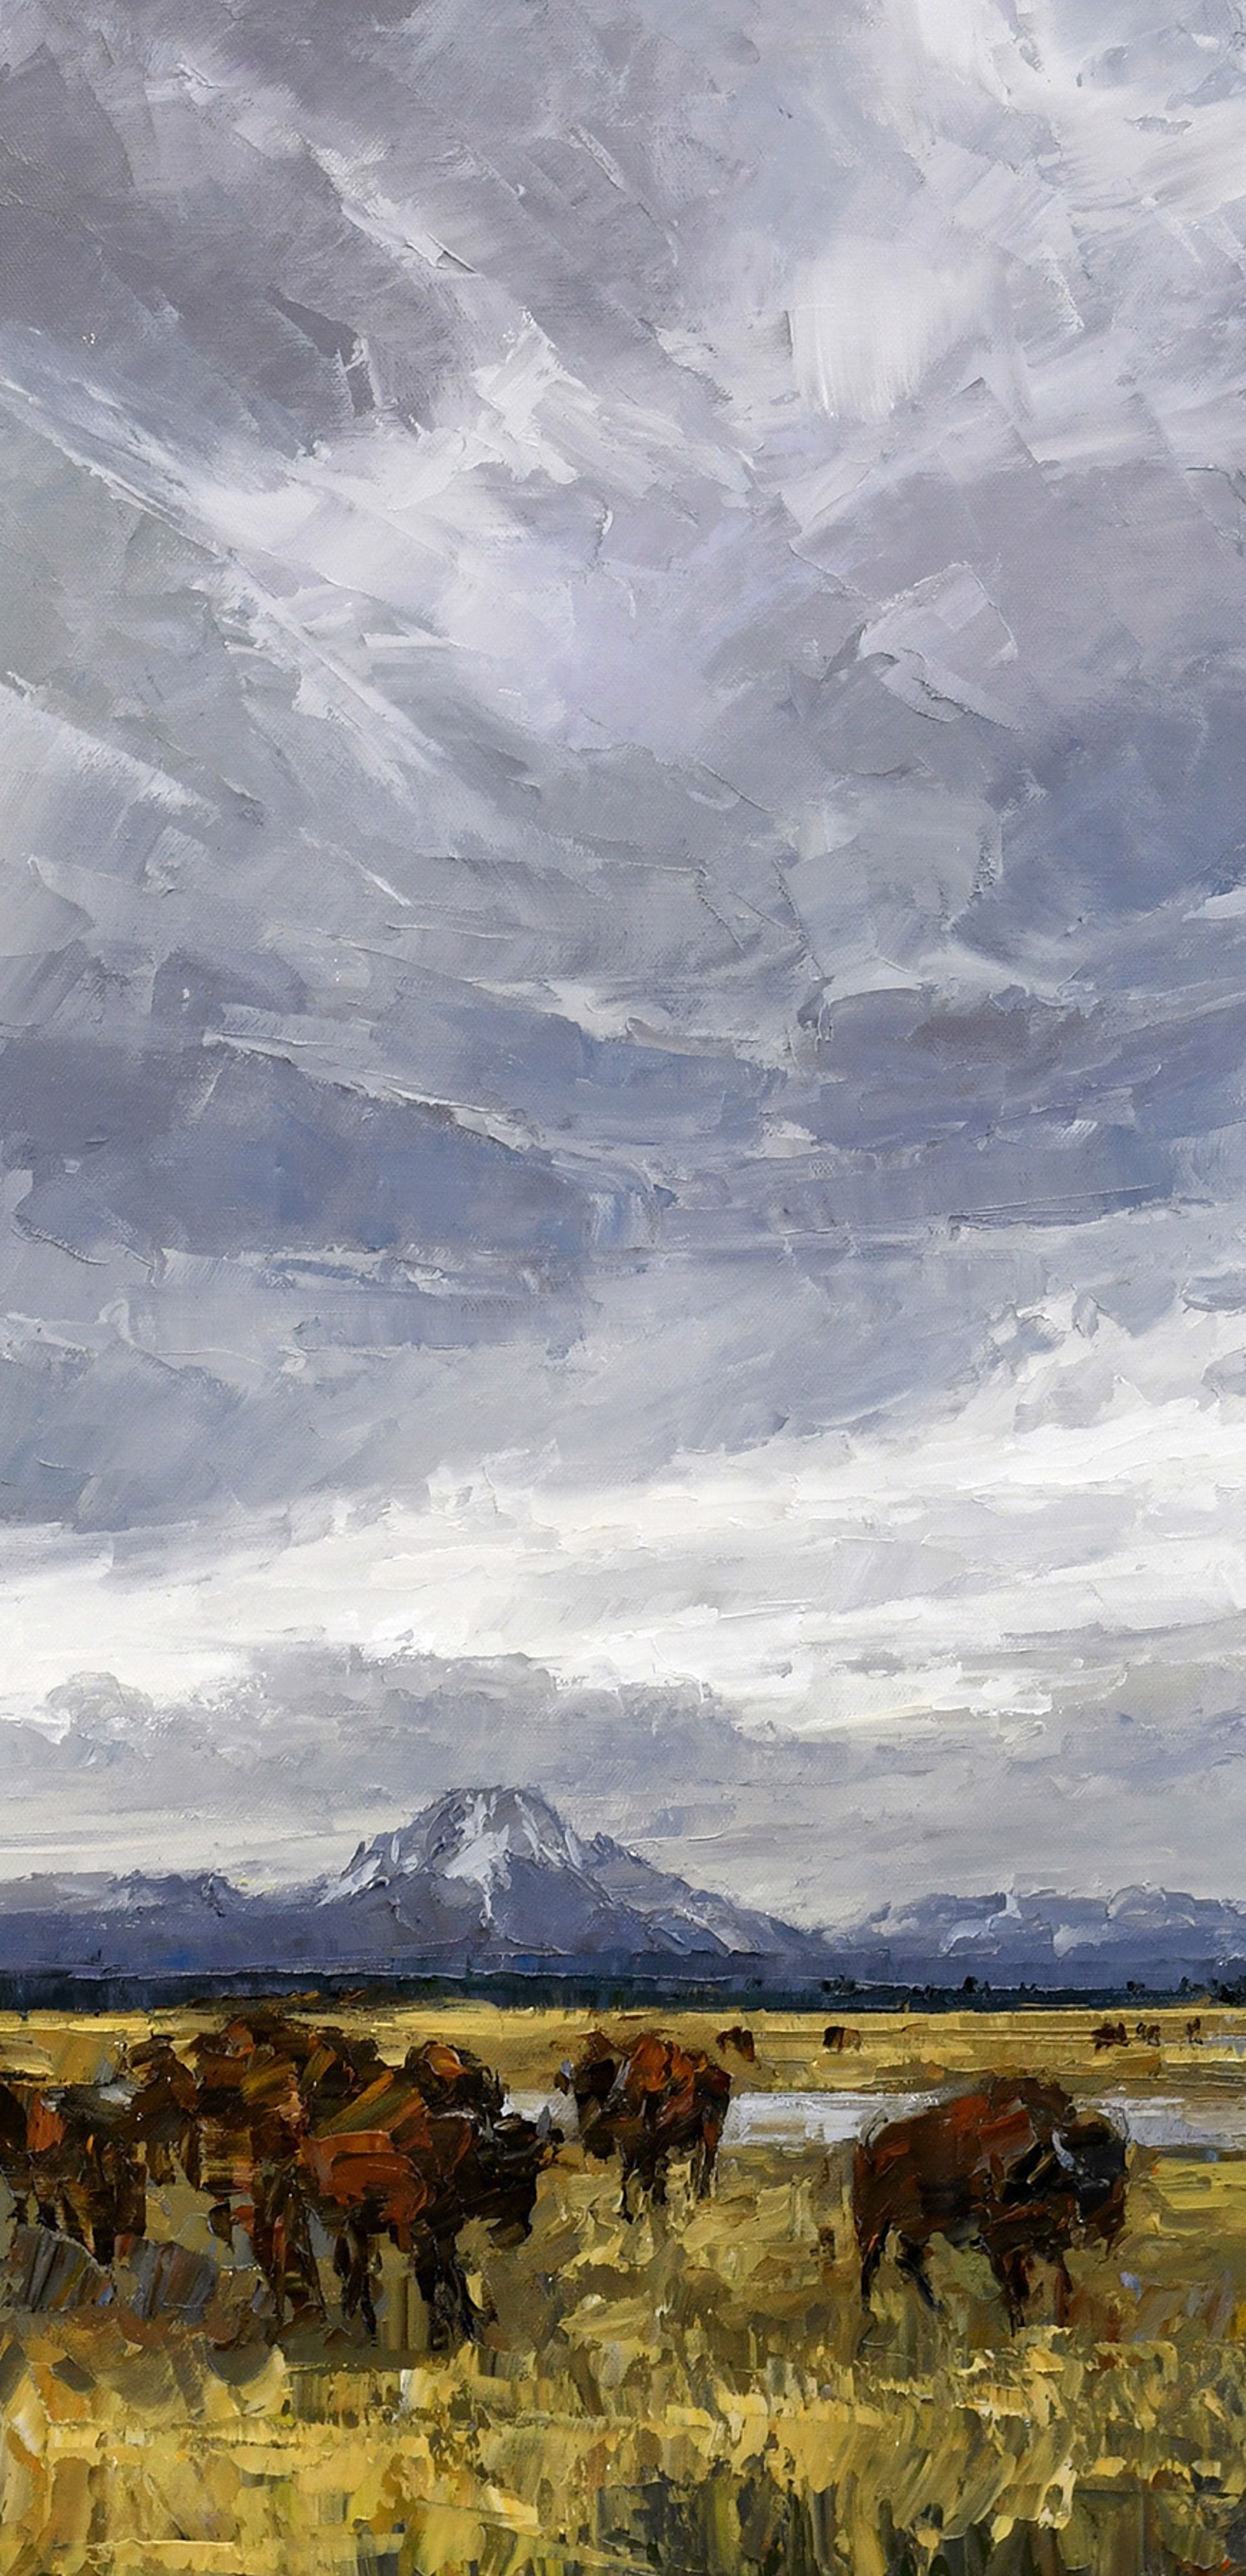 Study Of Original Oil Painting By Caleb Meyer Of Bison With Gray Skies And The Tetons